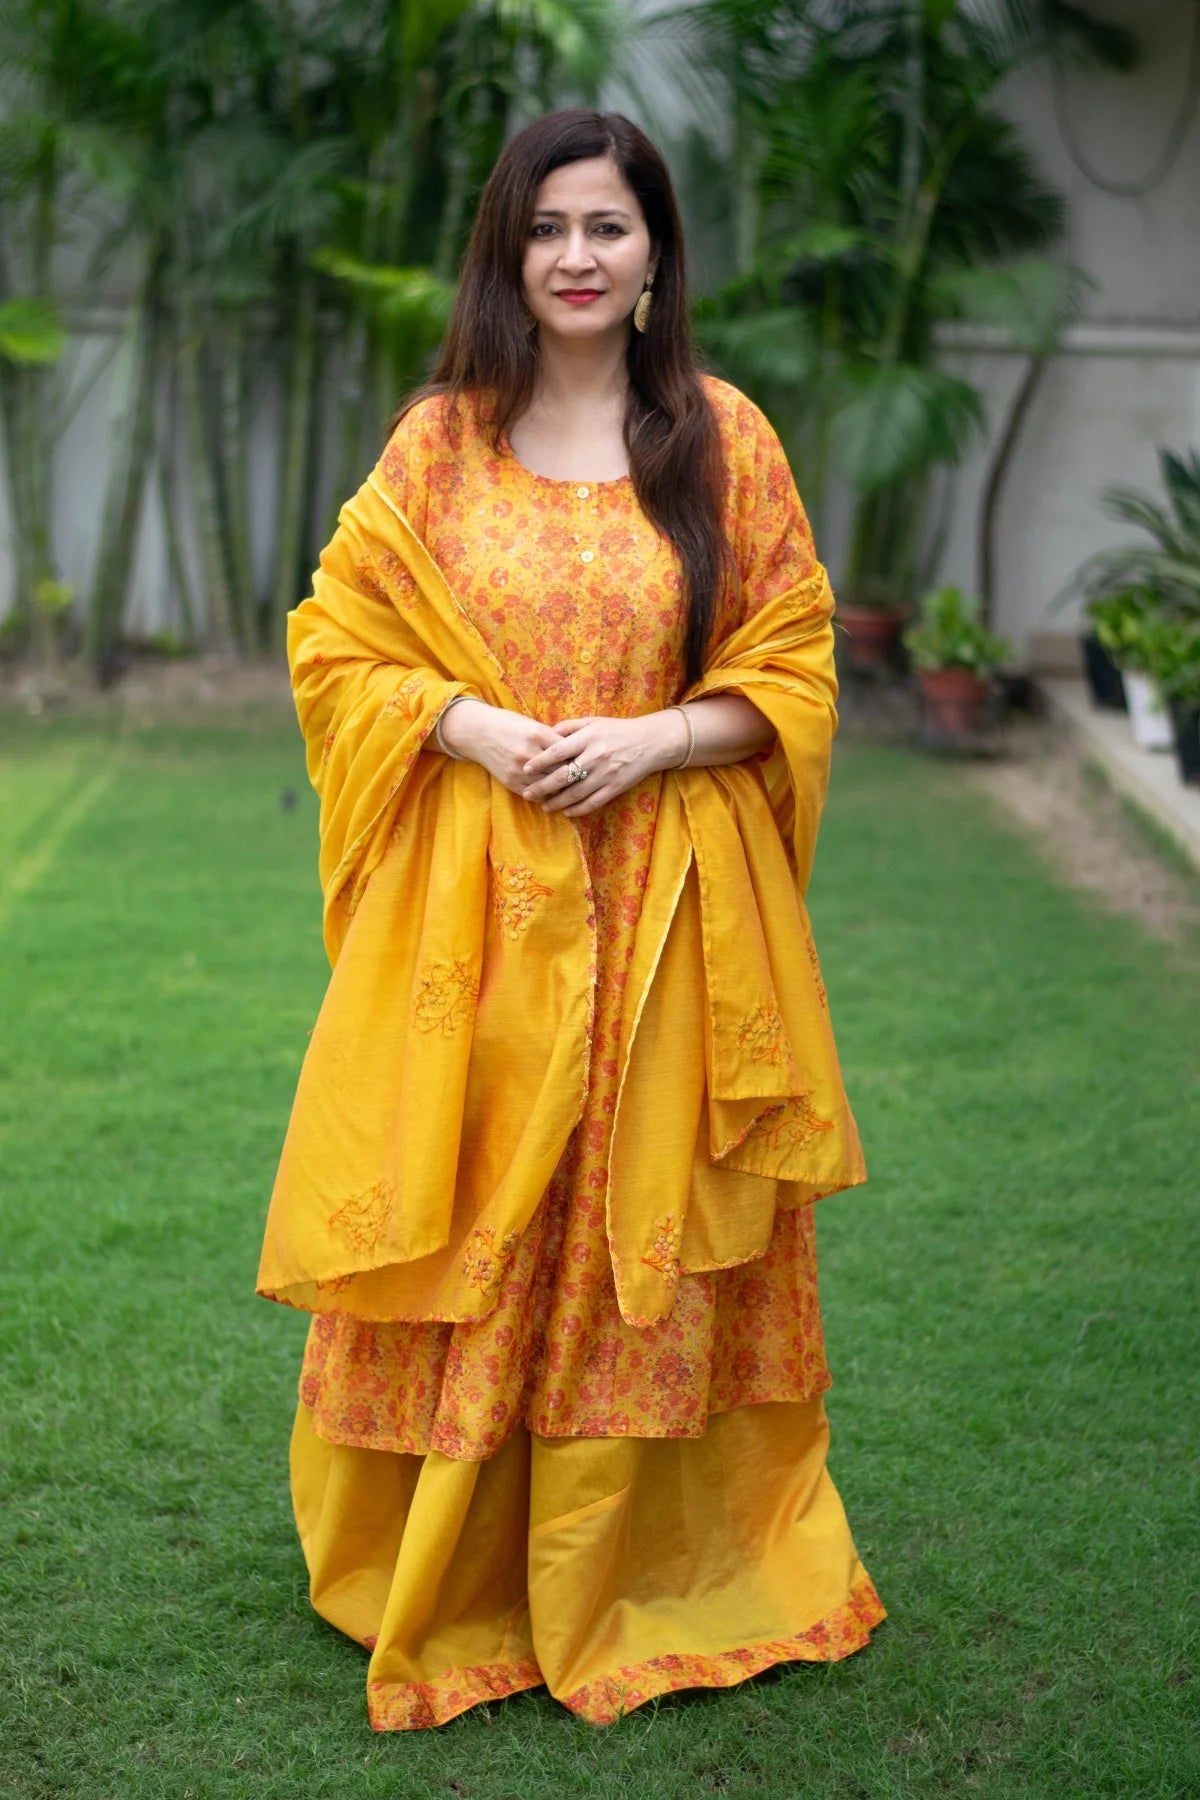 Vibrant yellow Chanderi Kurta on a woman with intricate gold embroidery. 